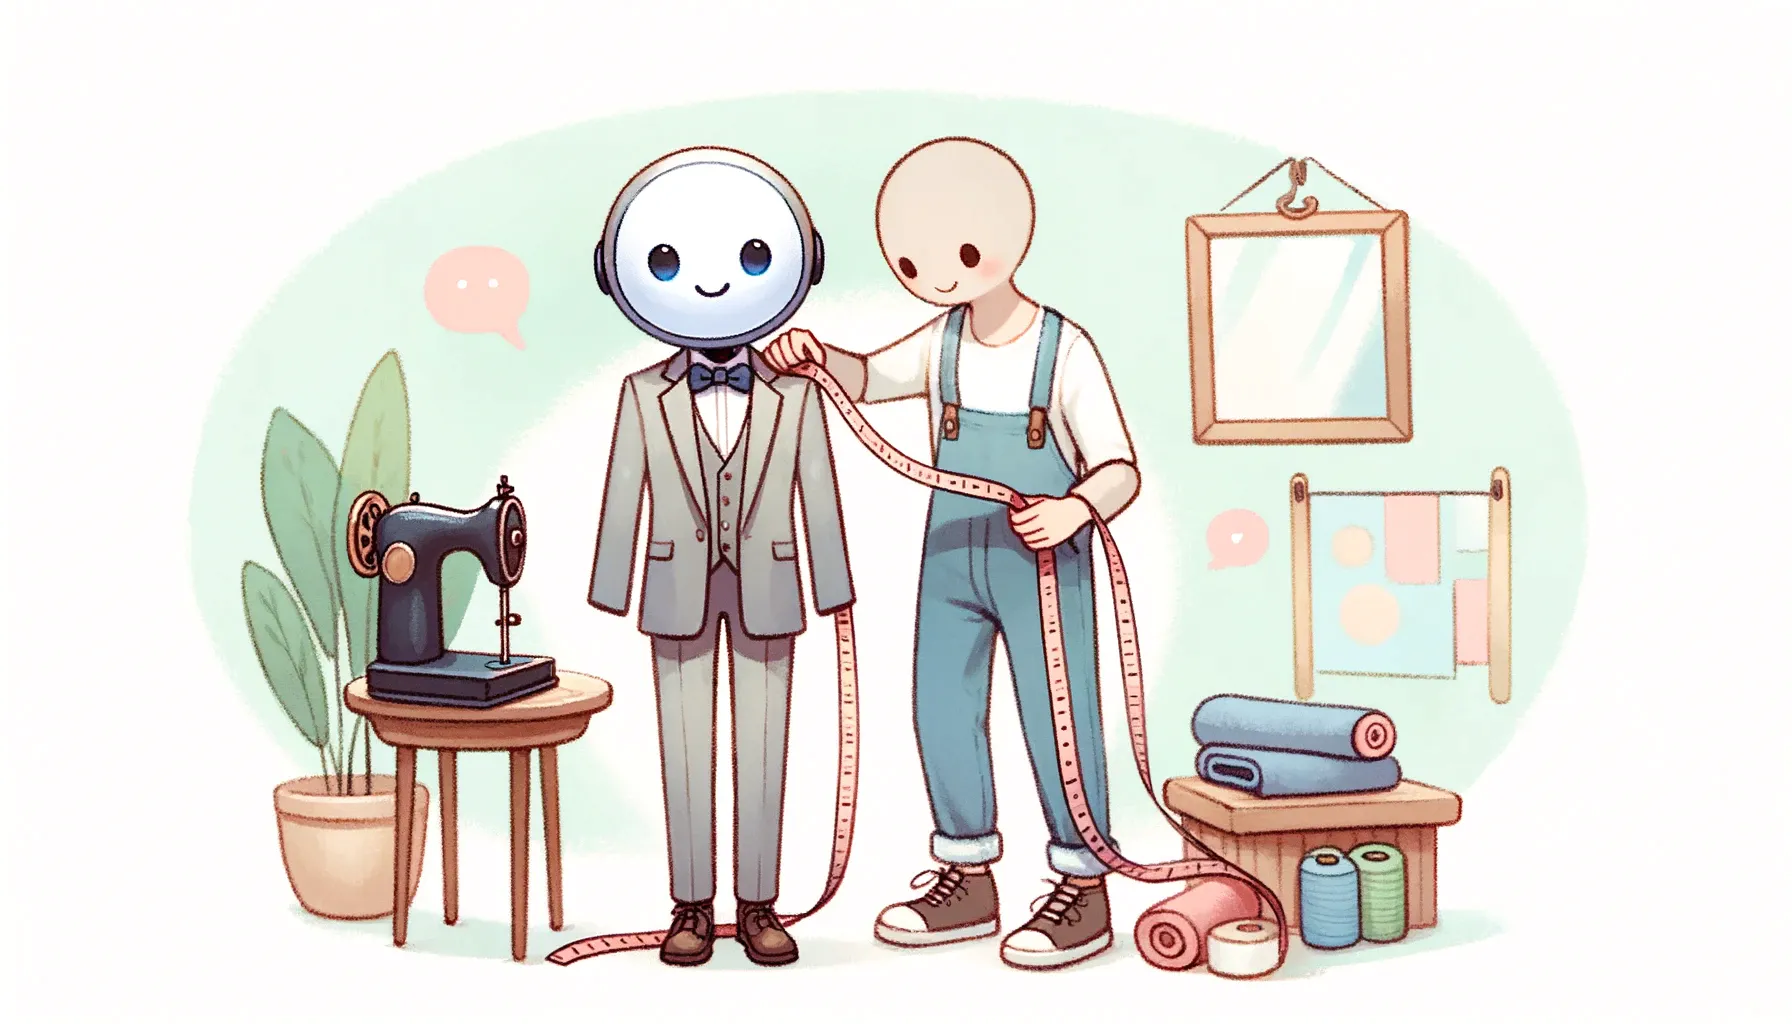 An illustration of a tailor taking measurements to fit a suit on a robot, representing ChatGPT